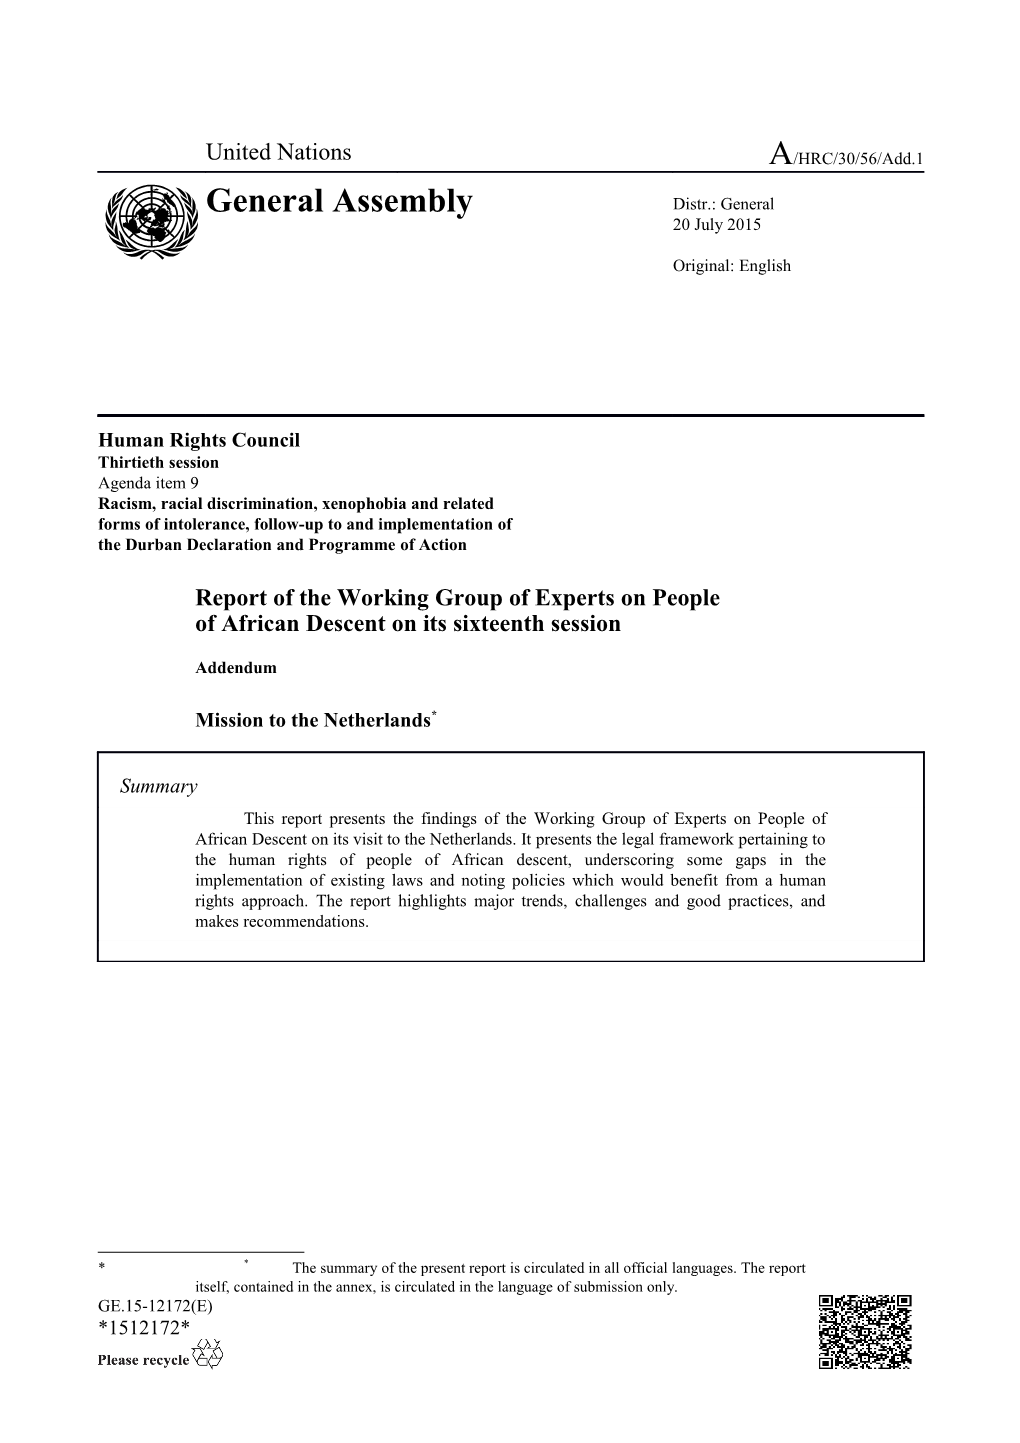 Report of the Working Group of Experts on People of African Descent - Addendum - Mission